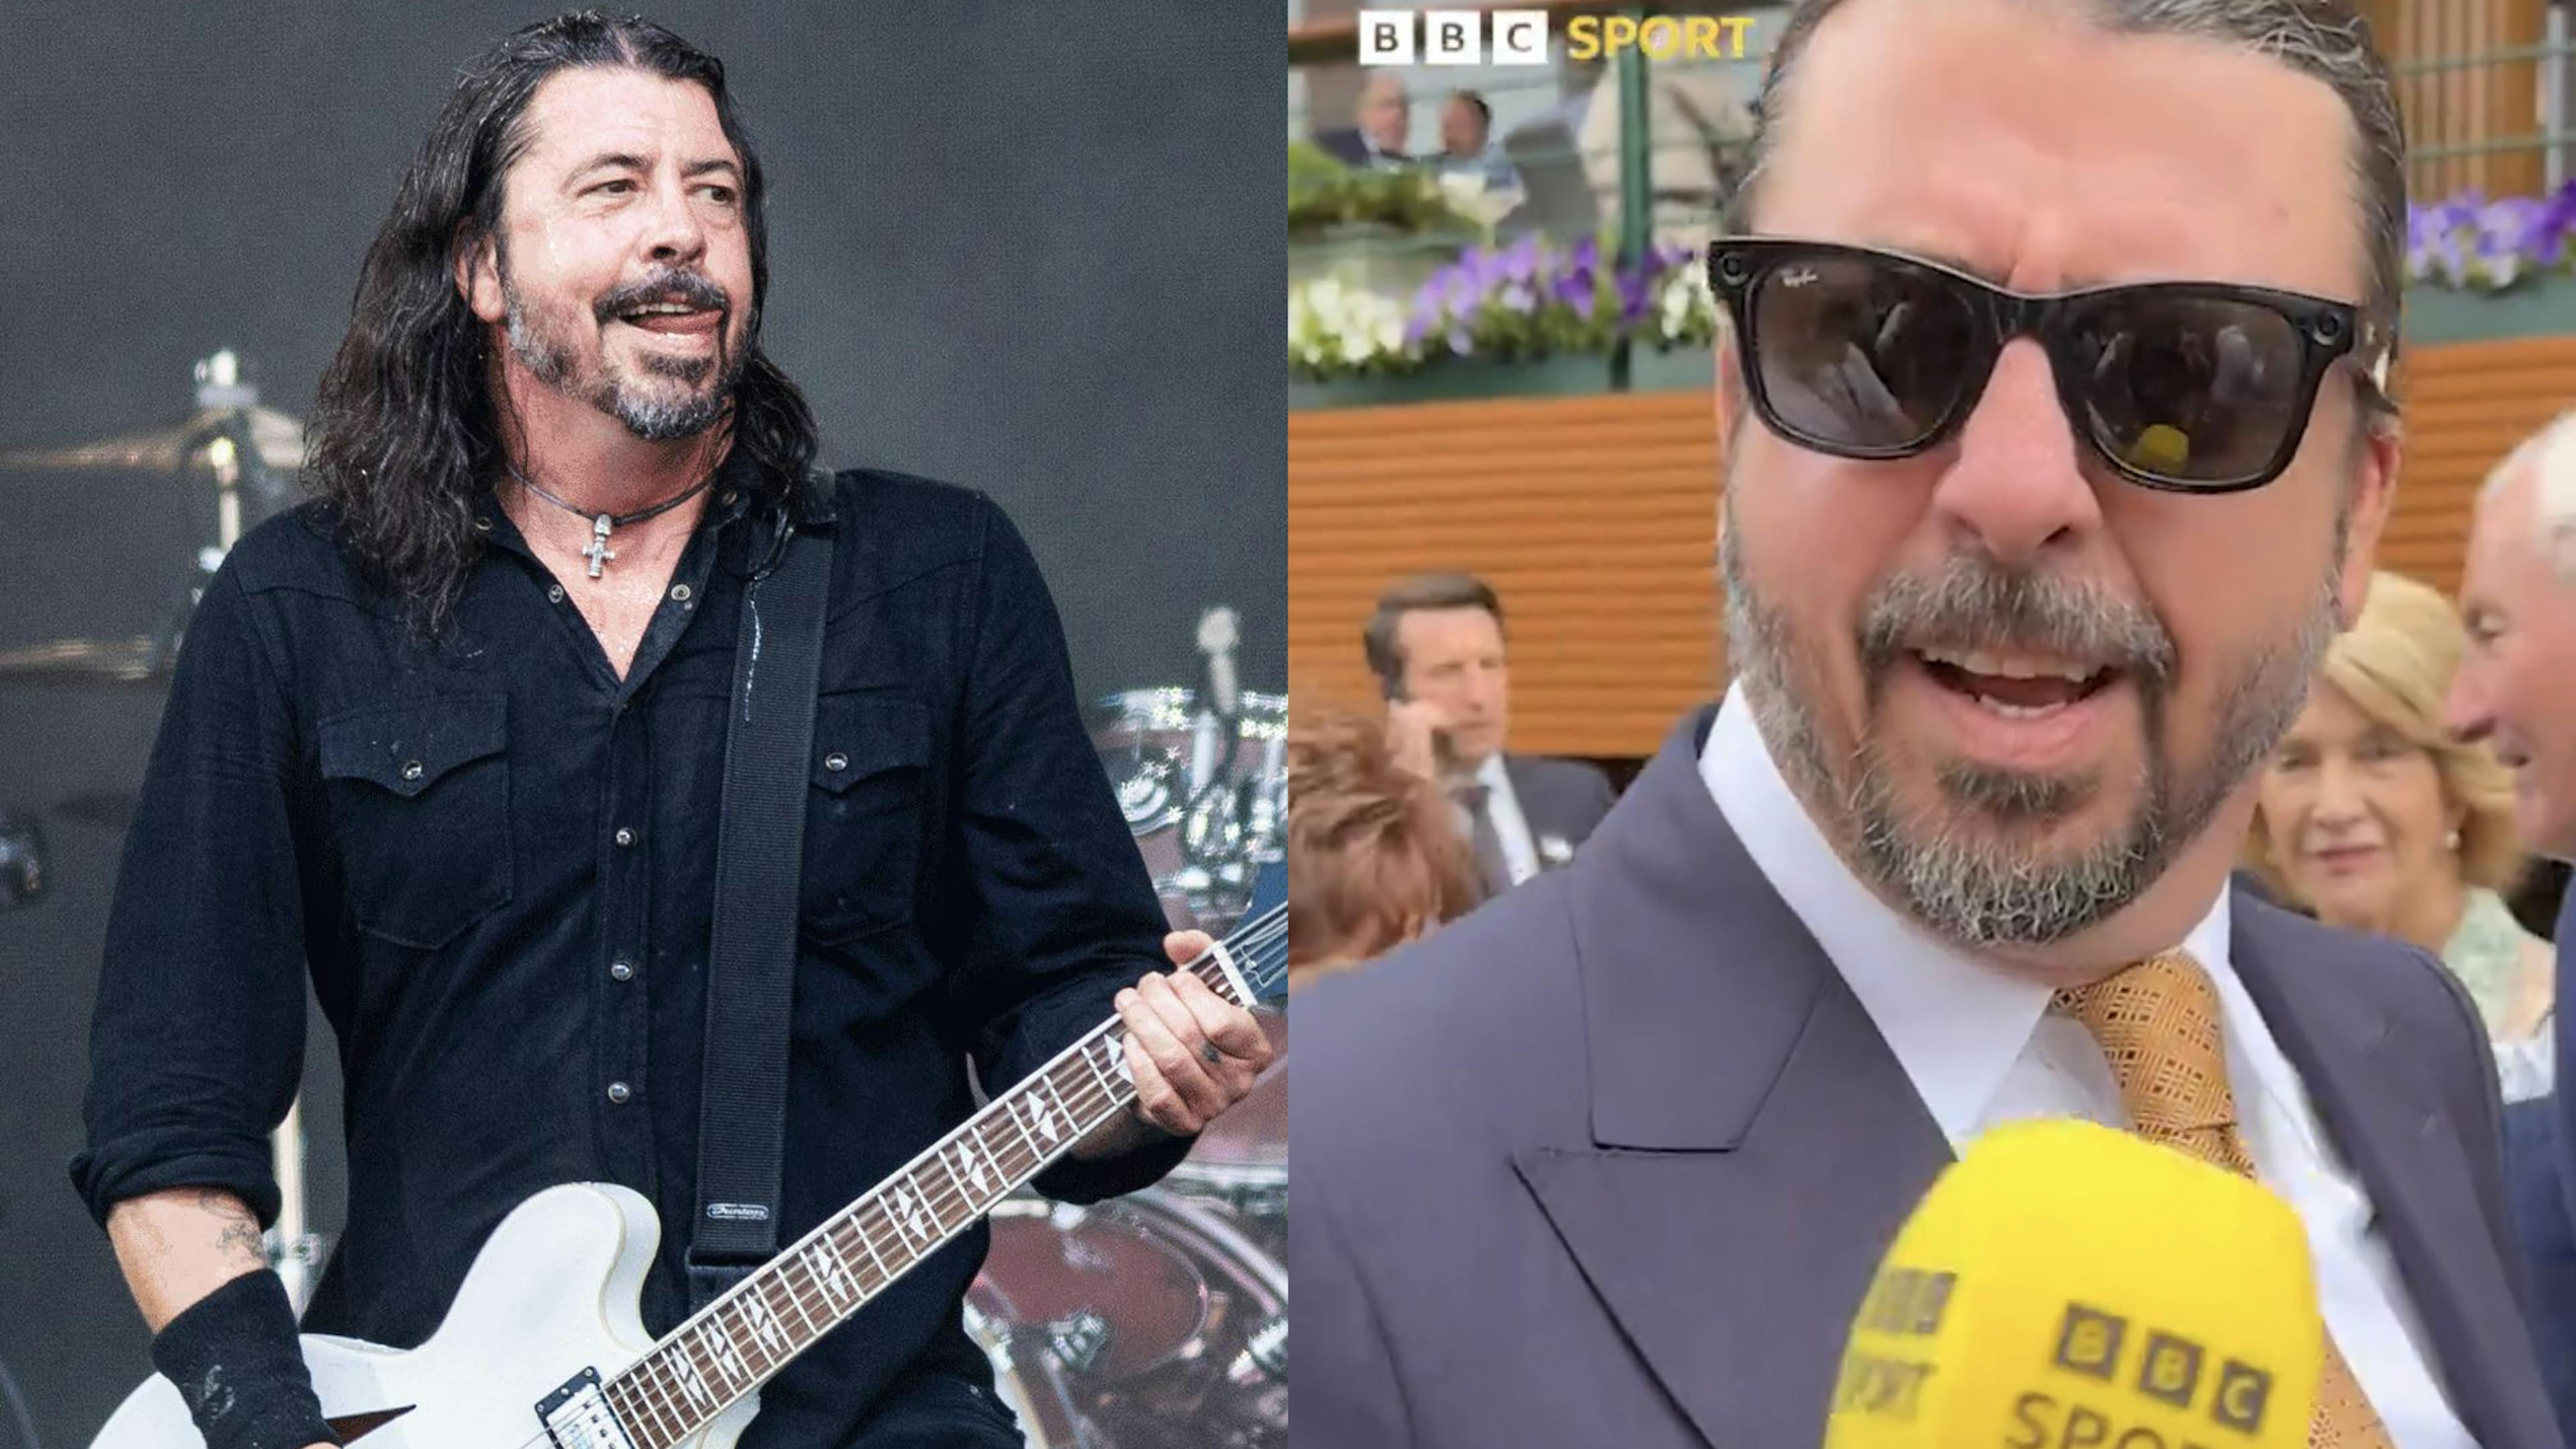 Suited-up Dave Grohl makes Wimbledon appearance between Foo Fighters summer shows